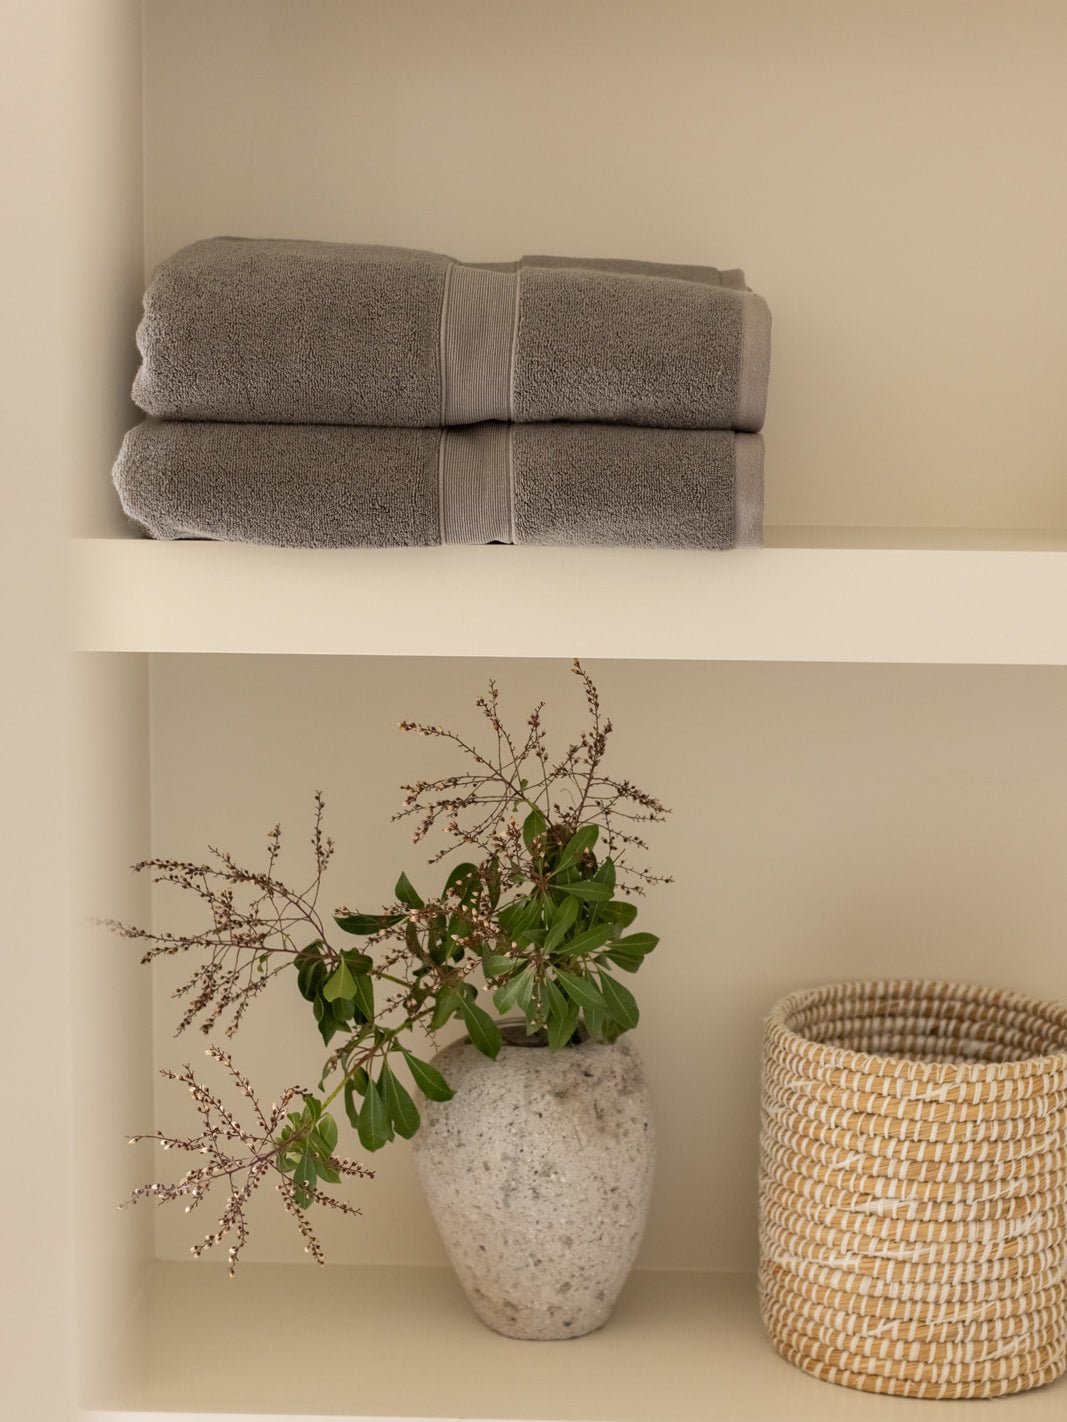 Charcoal luxe bath towels folded on shelf |Color:Charcoal